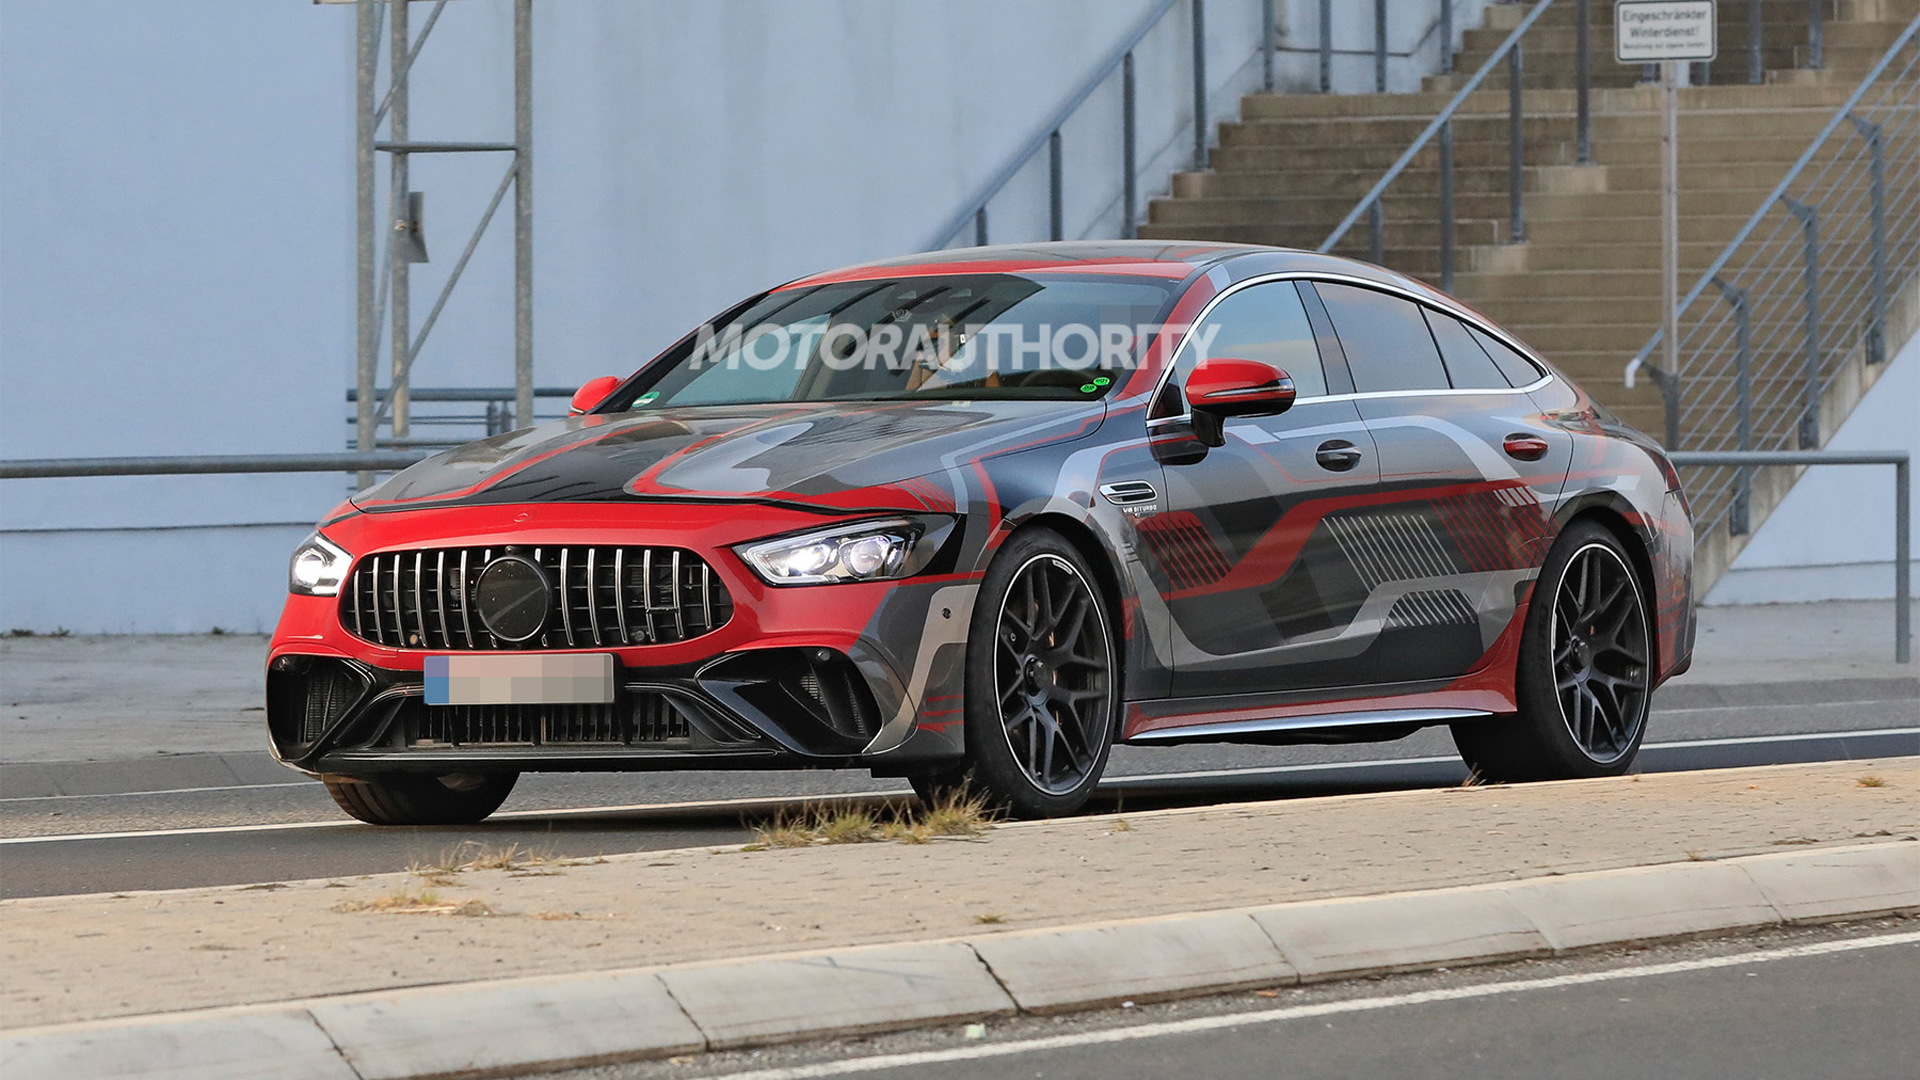 2022 Mercedes-Benz Amg Gt 73E 4-Door Coupe Spy Shots And Video: 800-Plus-Hp  Super Hatch Coming Soon